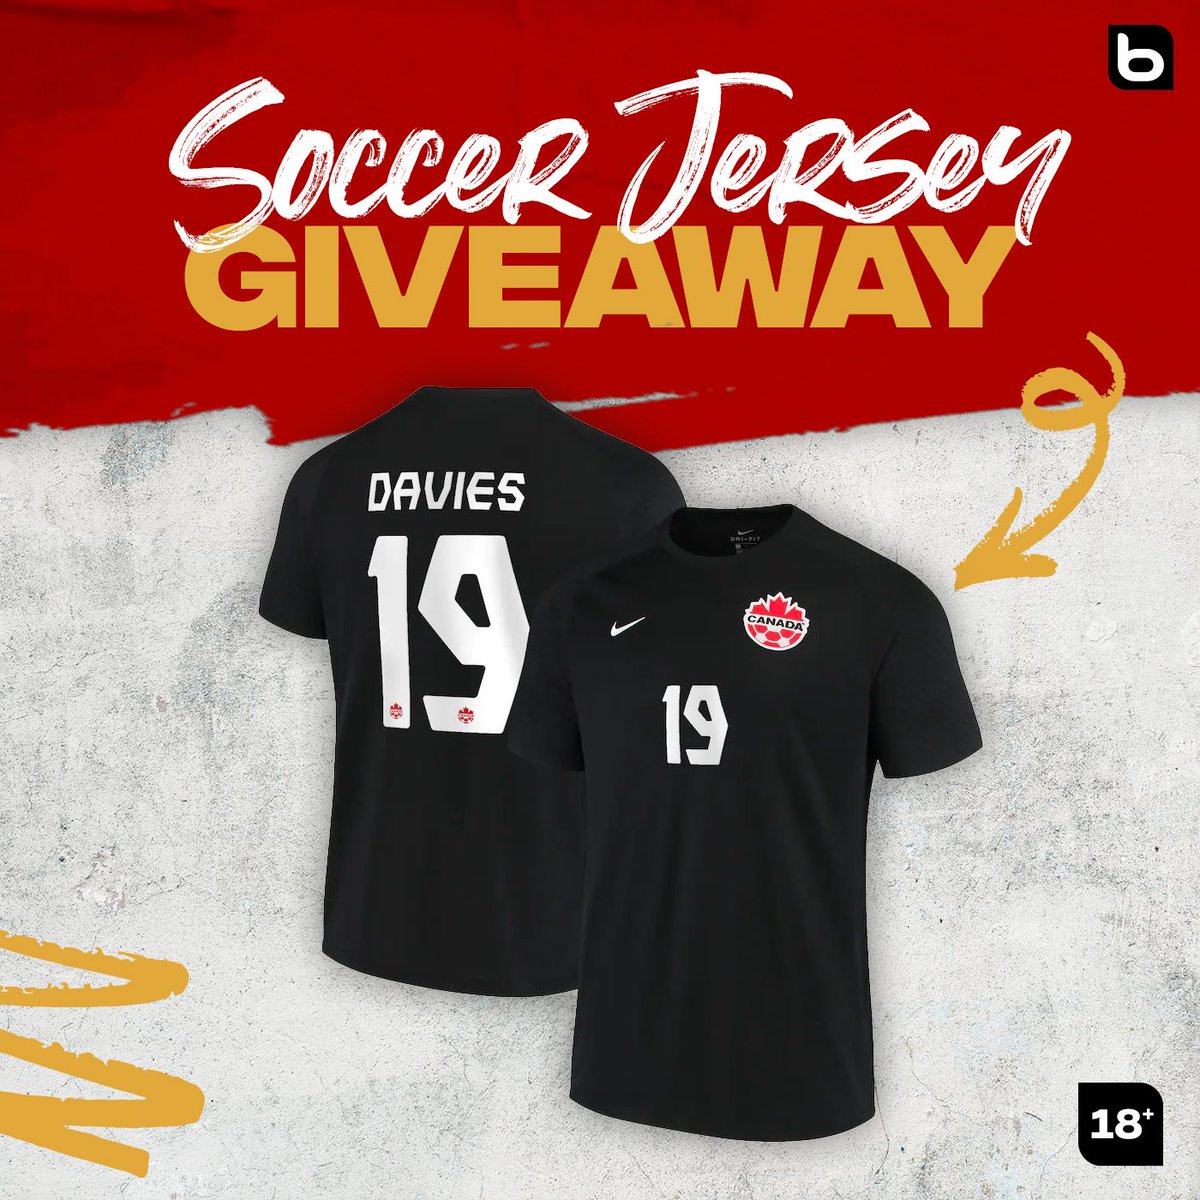 &#128680;⚽️ BODOG TEAM &#127464;&#127462; SOCCER JERSEY GIVEAWAY! 

Who wants a FREE Team Canada jersey? &#128526;

To Enter:

• ❤️ and &#128257; this tweet

• Follow @BodogCA and @BodogCasino_ 

• Tell us who the greatest player in Canadian Soccer history is 

We’ll pick TWO lucky winners!

